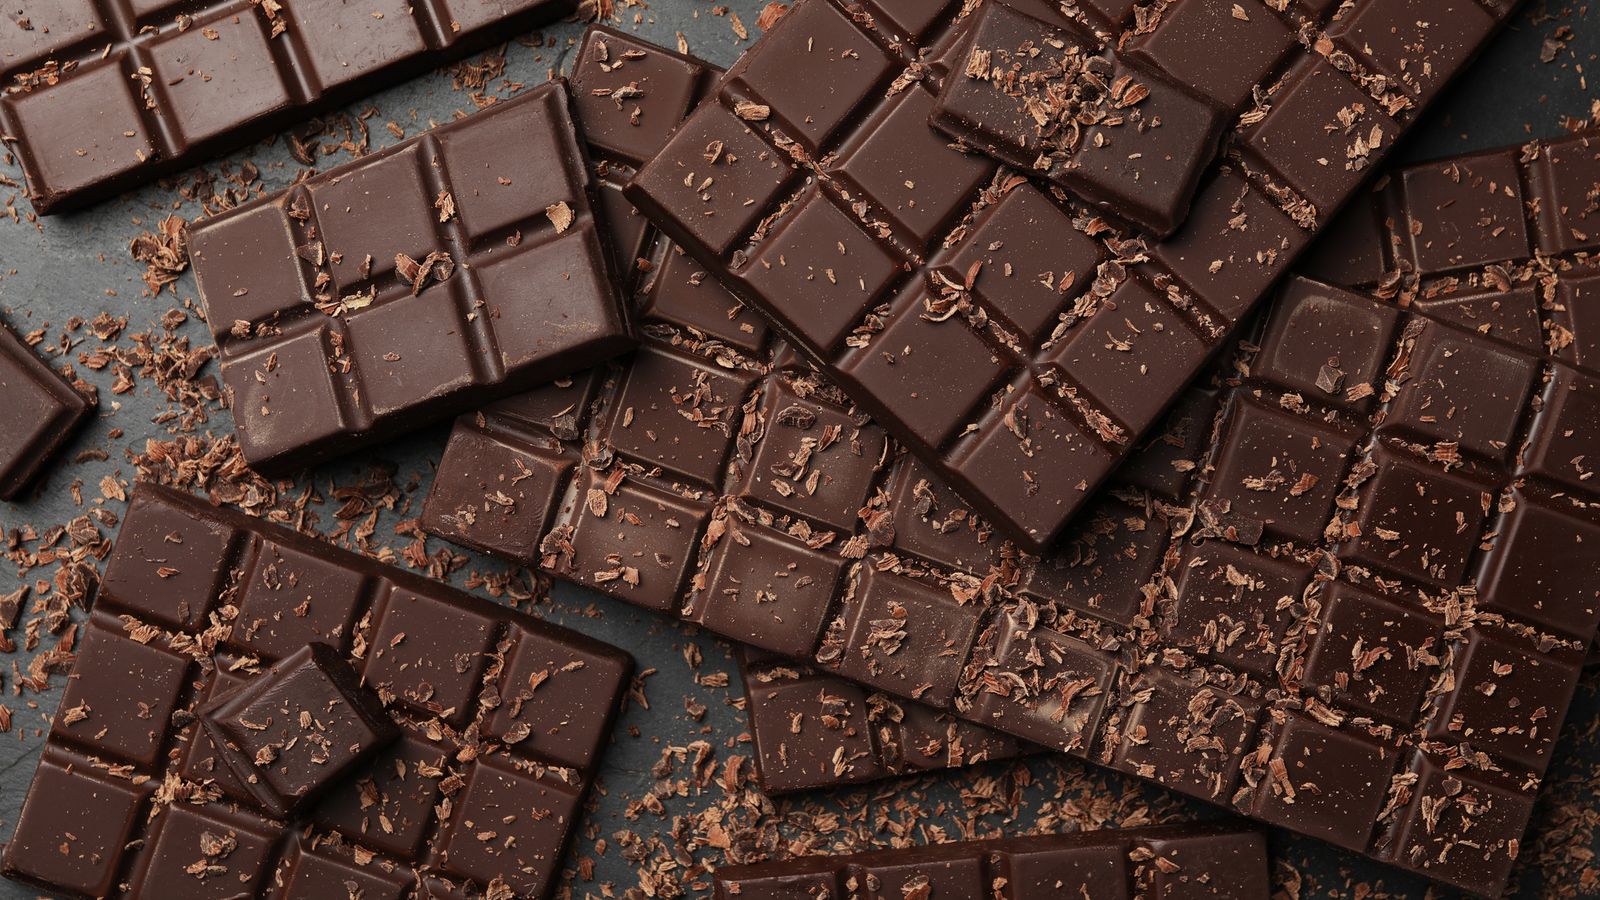 Money latest: Chocolate is a superfood – if you buy these bars